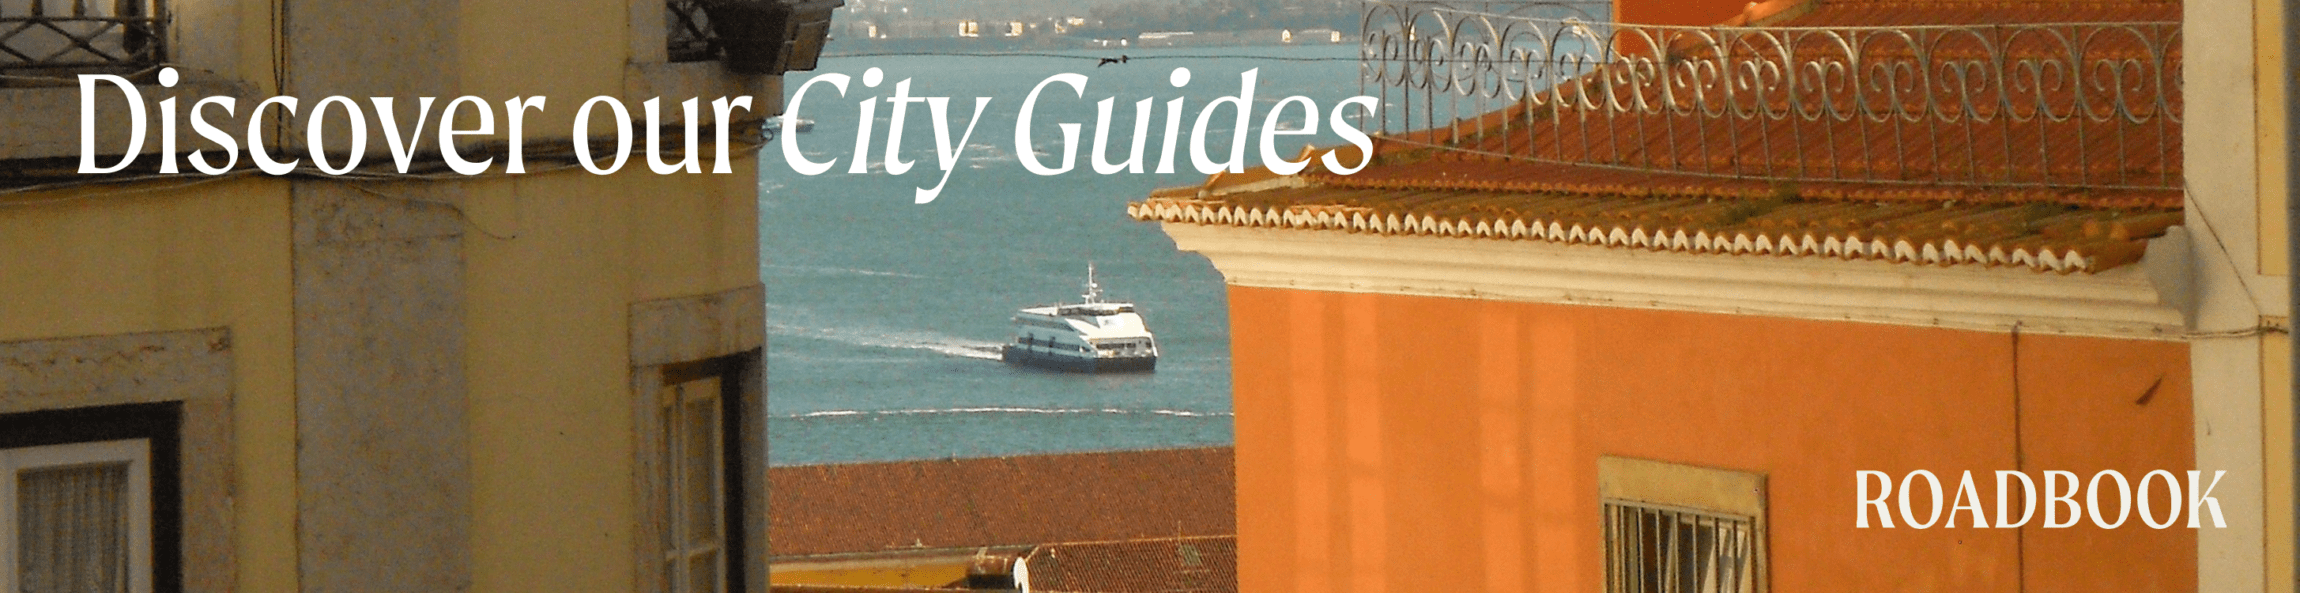 City guide advert